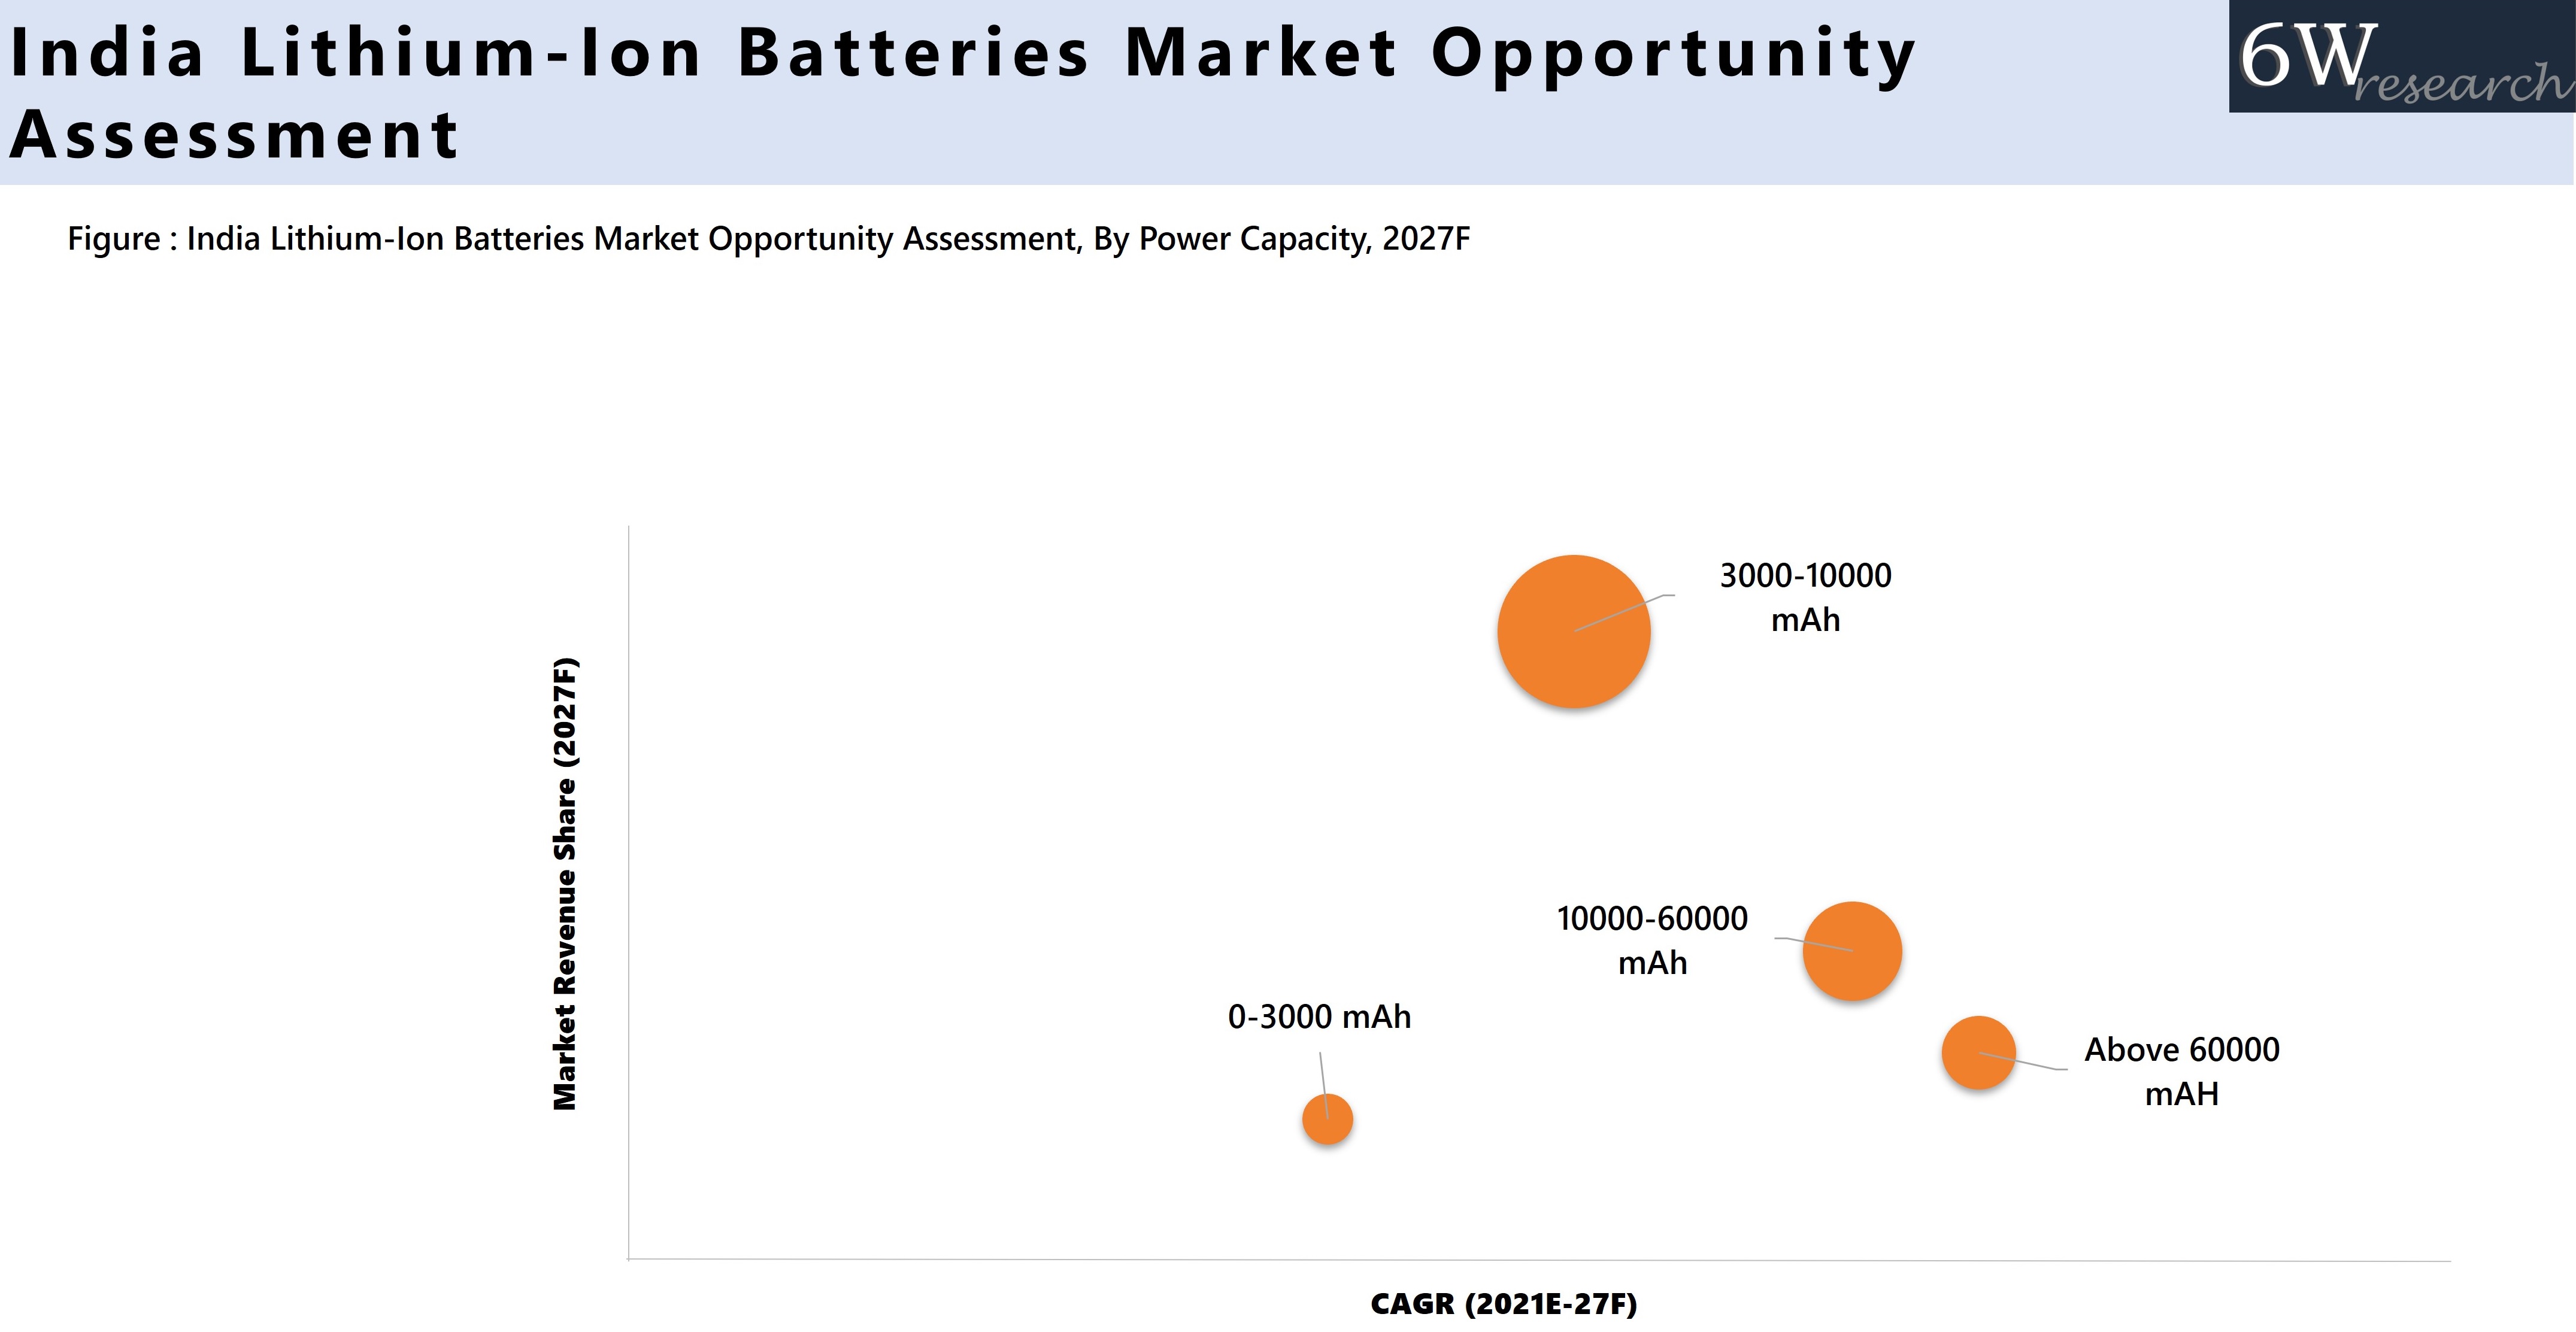 India Lithium-Ion Batteries Market Opportunity Assessment